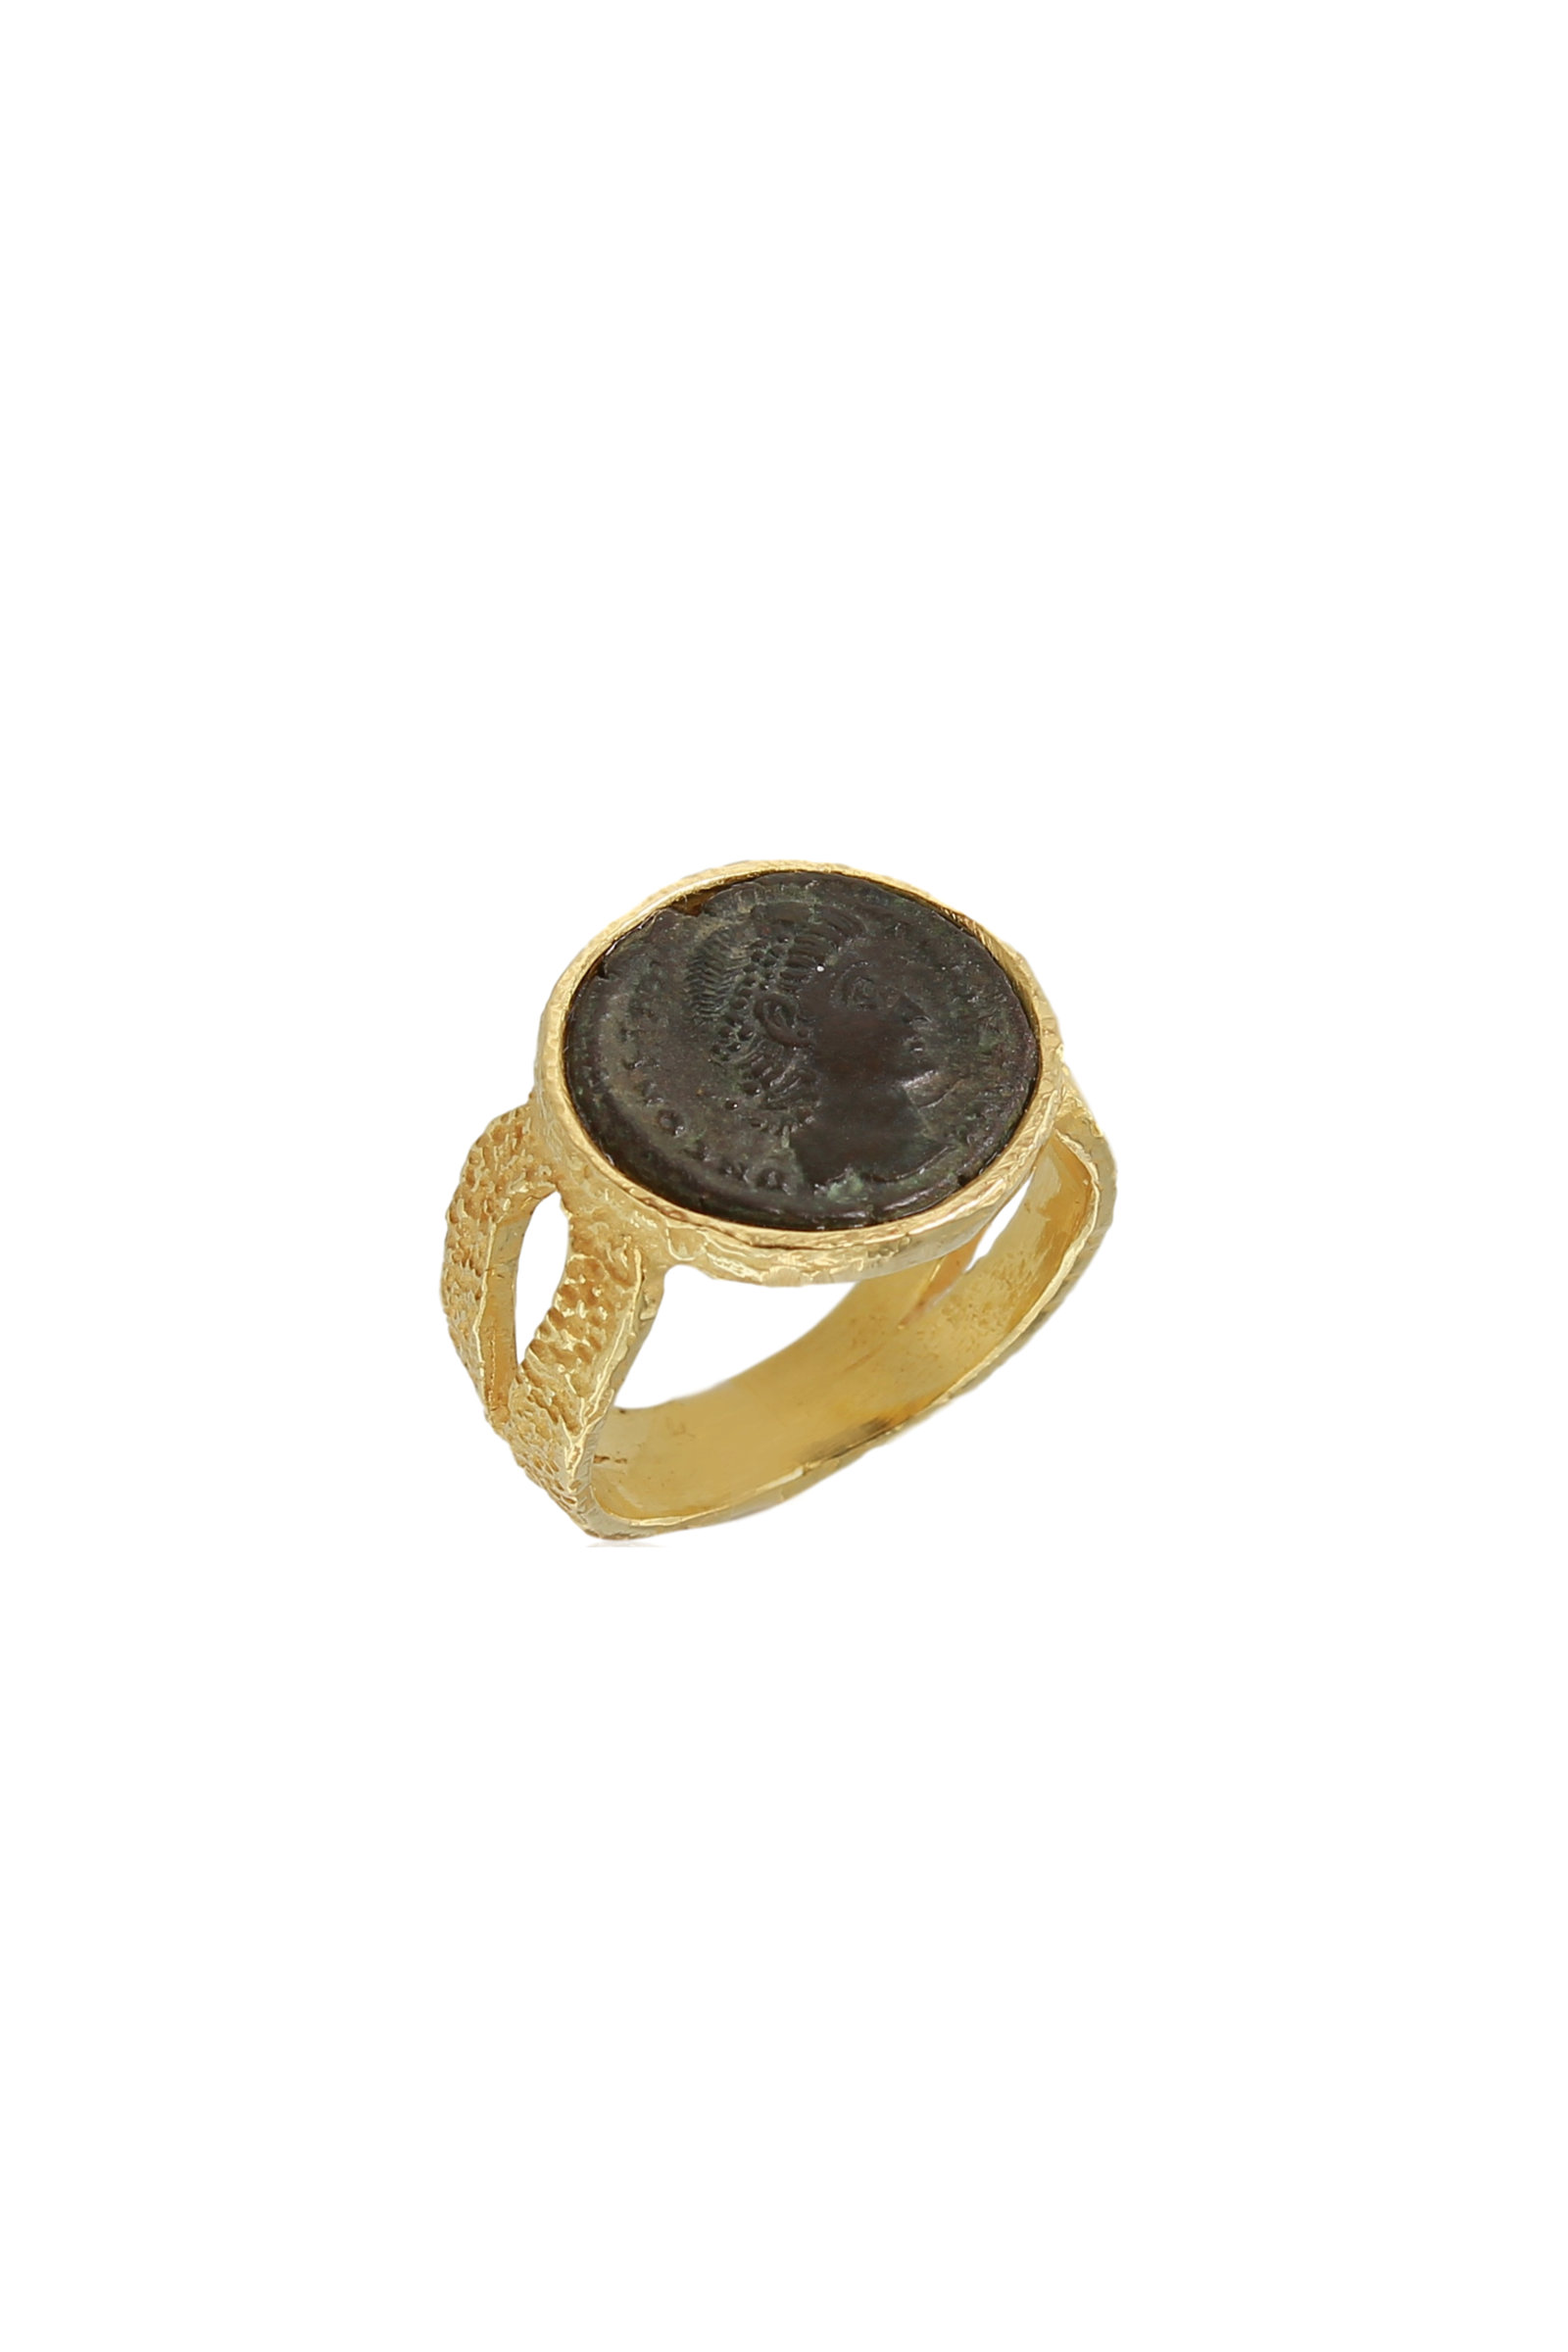 SE607A-18-Kt-Yellow-Gold-Ring-with-Roman-Coin-1